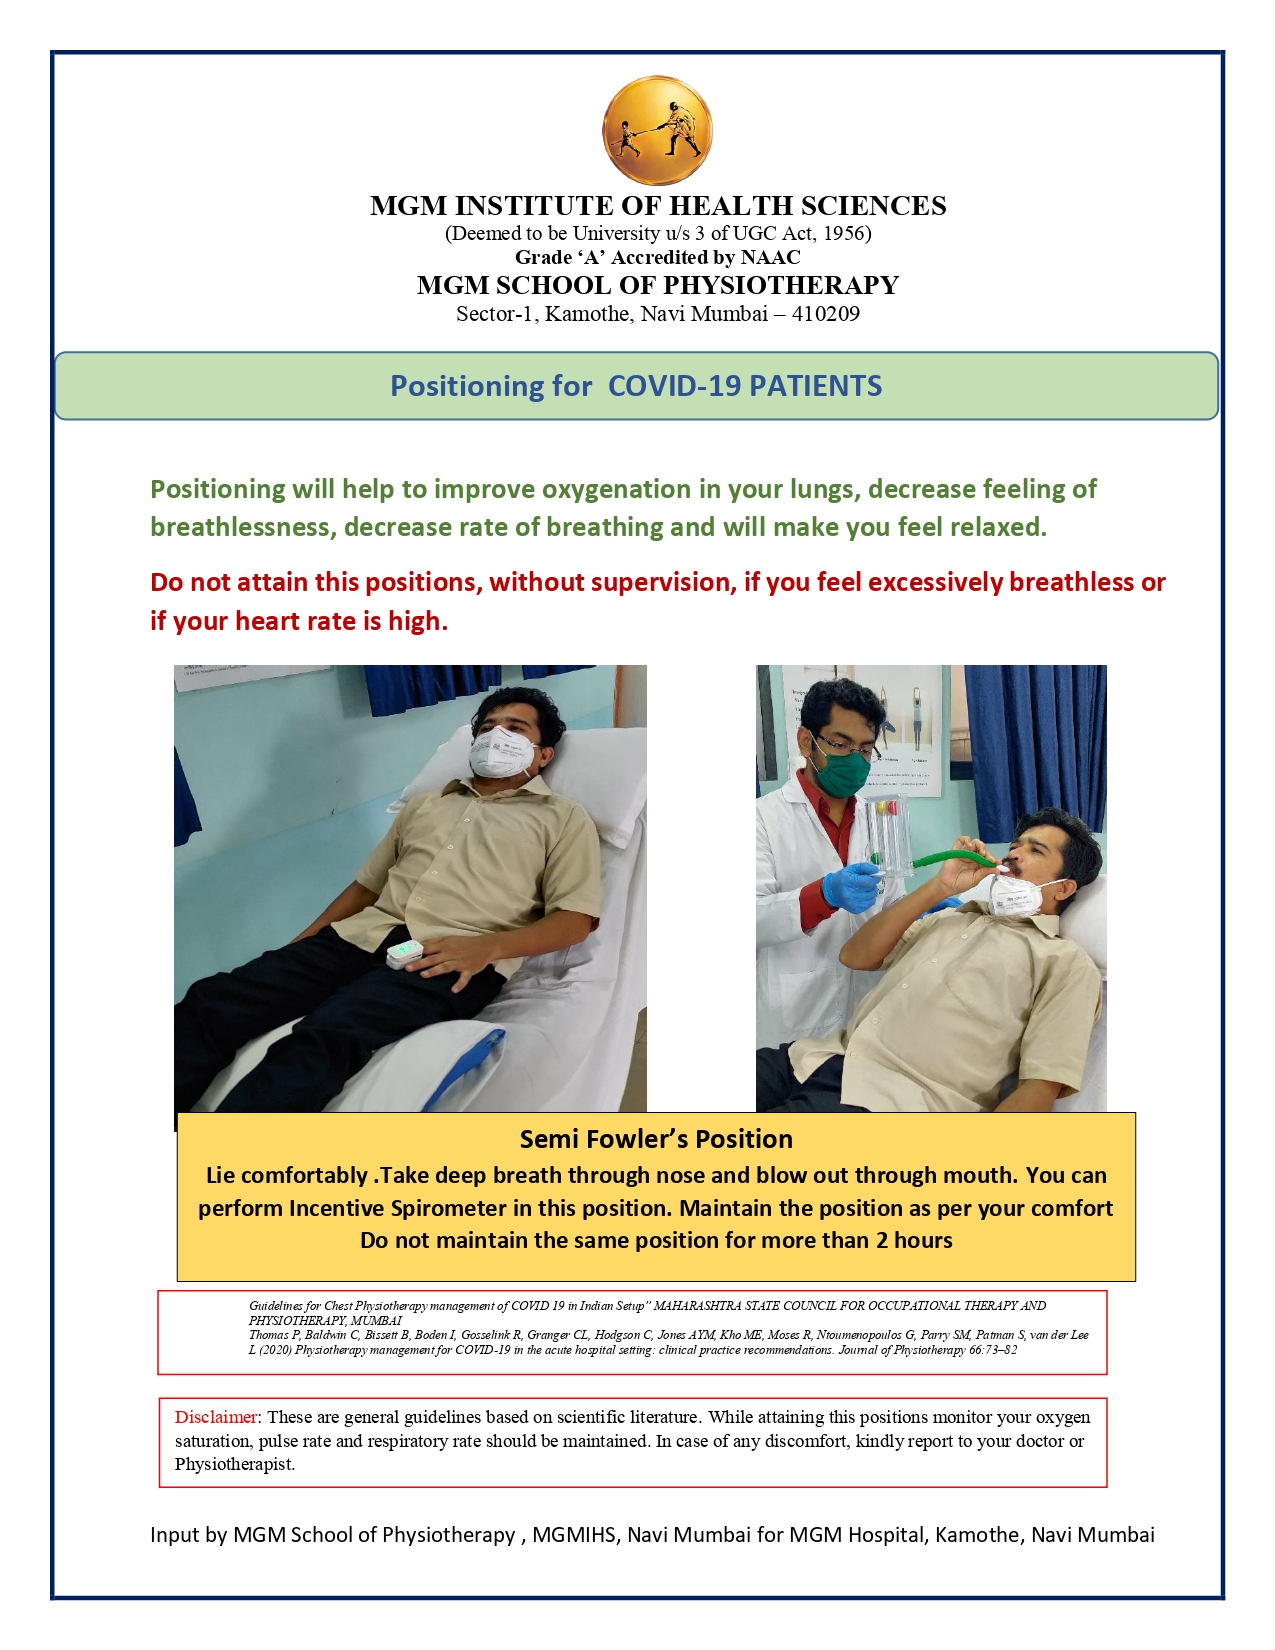 Positioning for COVID 19 Patients (English)